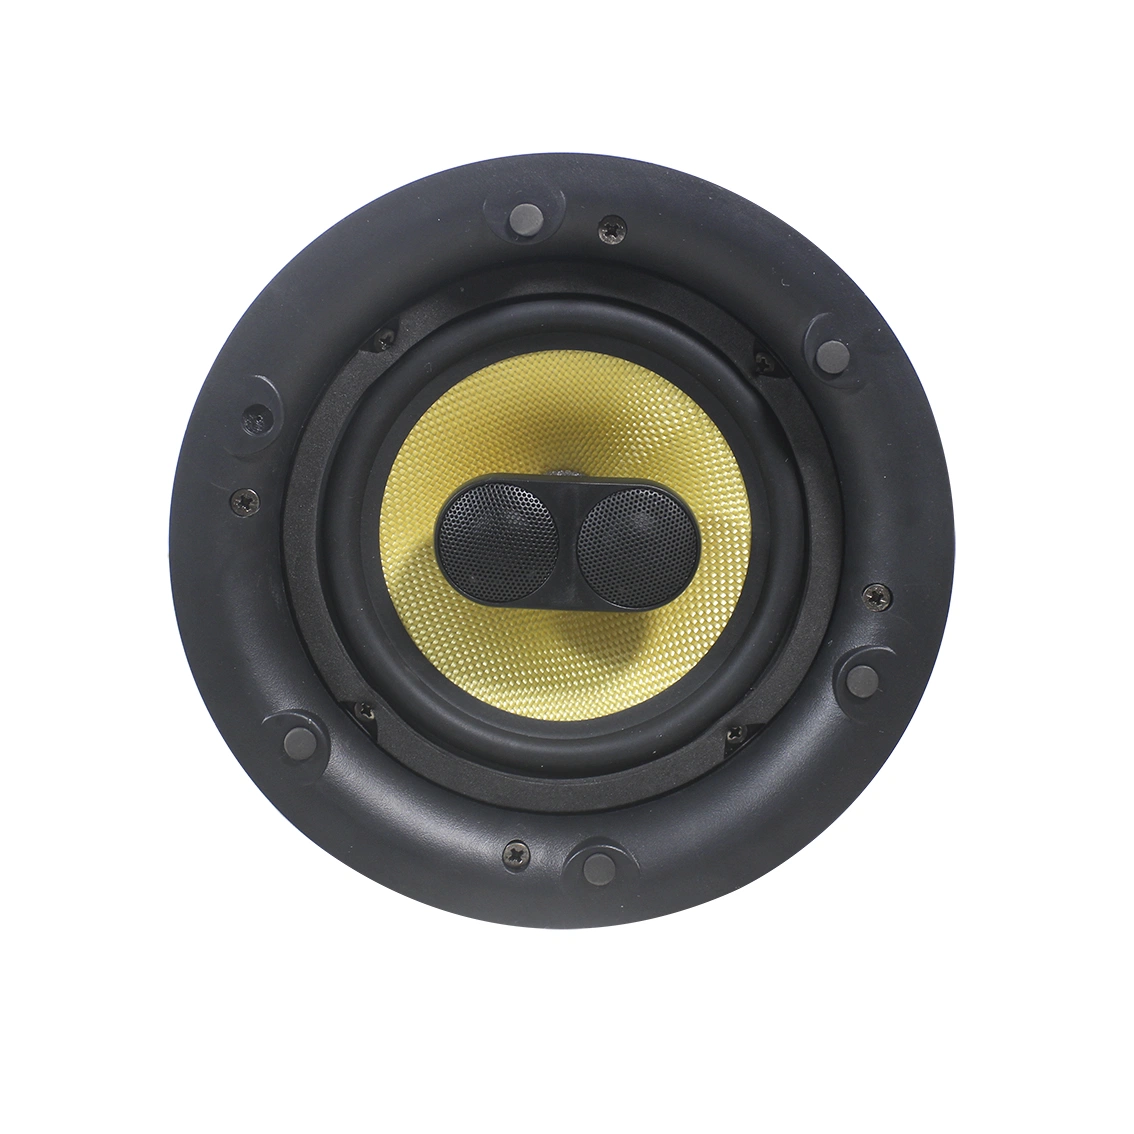 PA System 2 Way 6.5" 50W IP SIP Network in Ceiling Speakers Loudspeakers Support 12VDC or Poe with Dual Voice Coil Tweeter and Remote Control